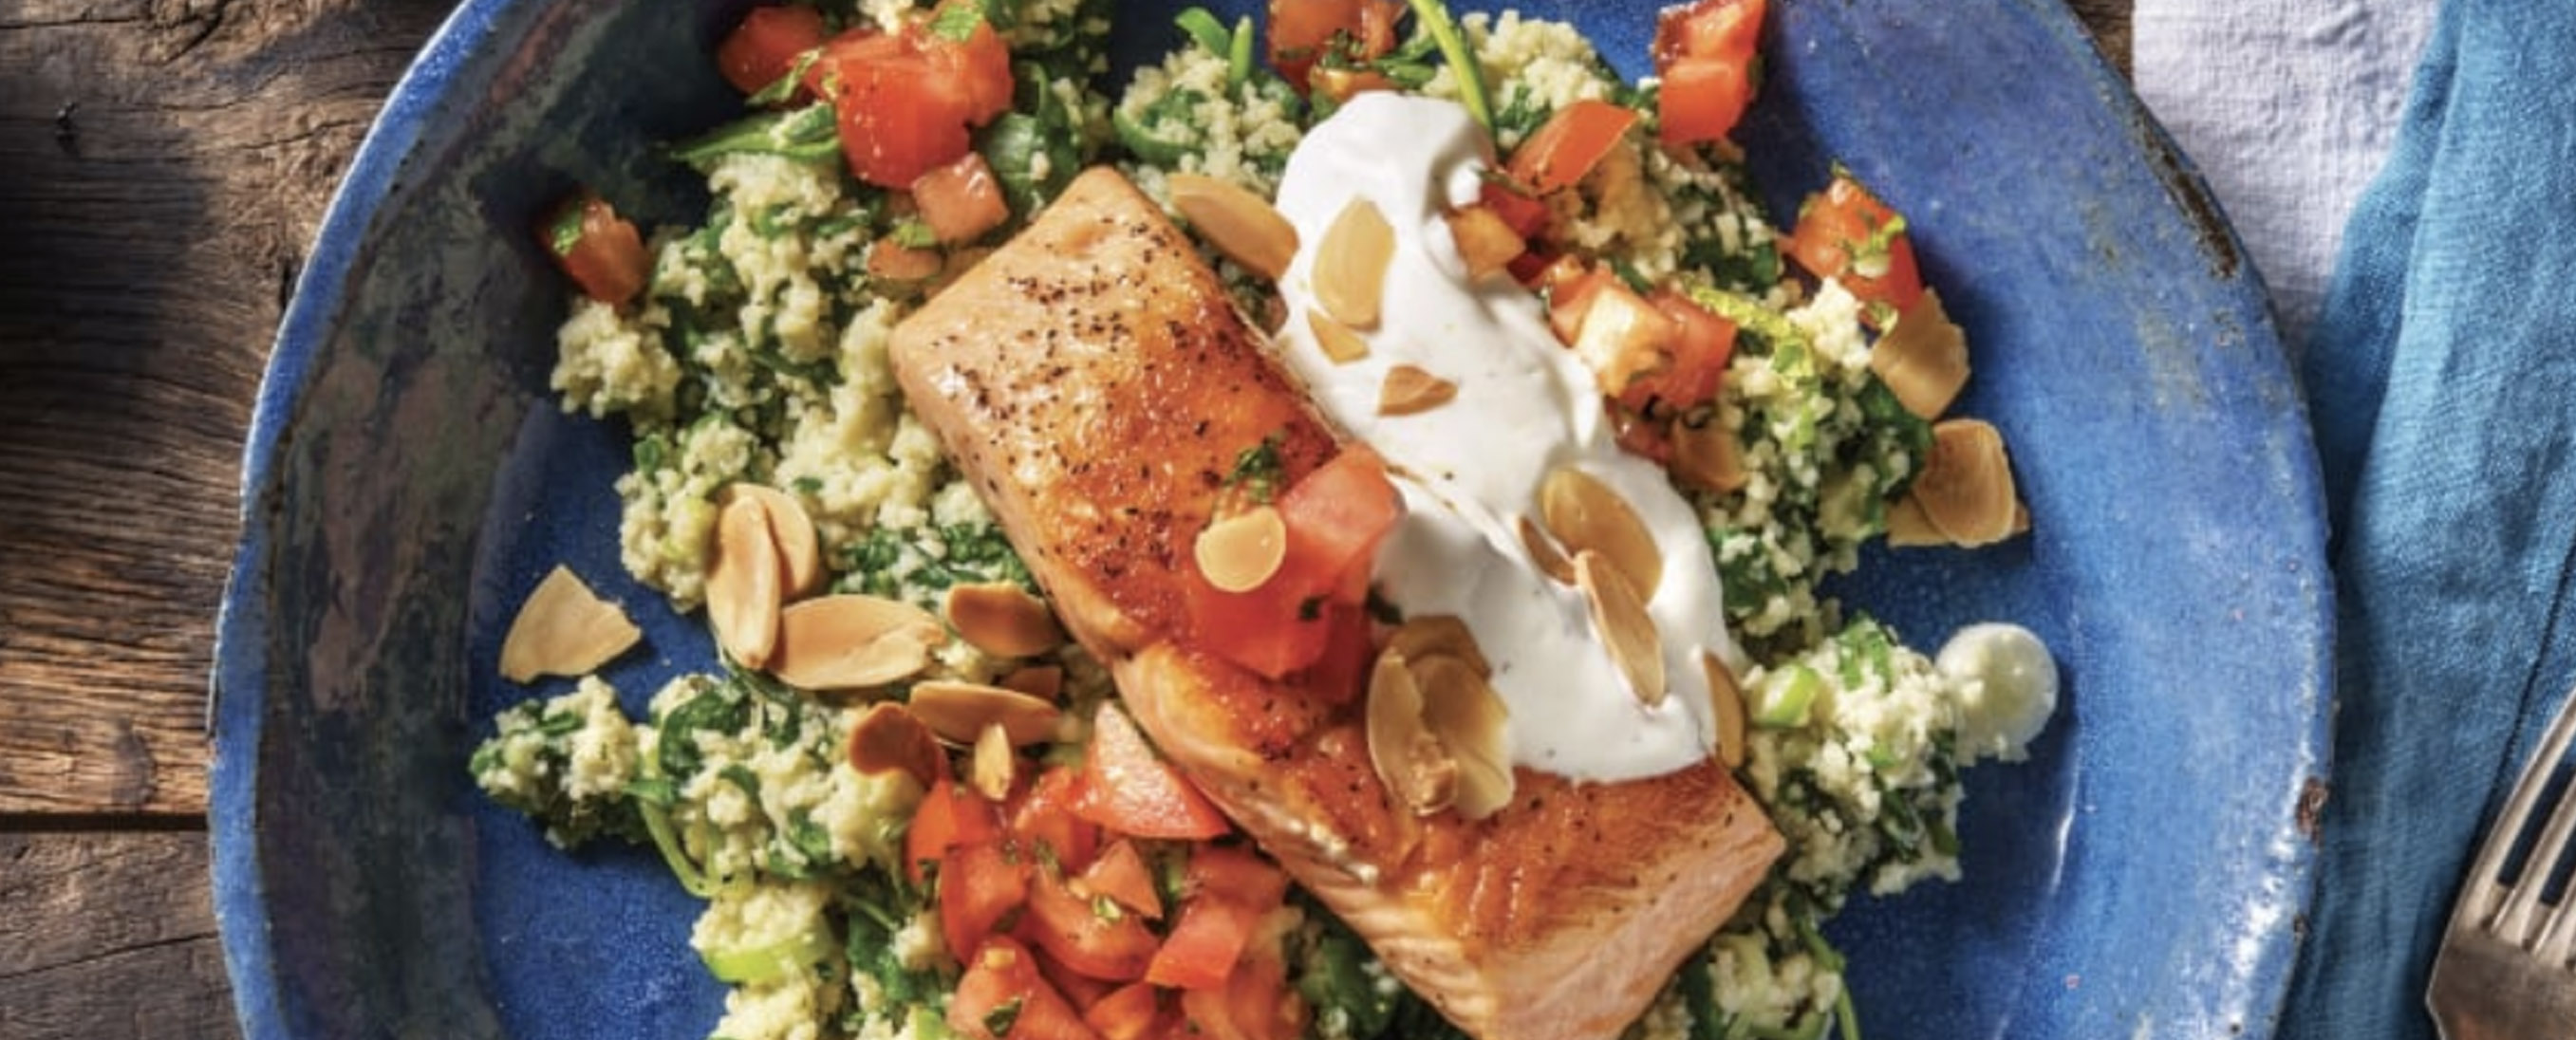 Hello Fresh recipe: Seared Salmon & Herbed Couscous - An ...